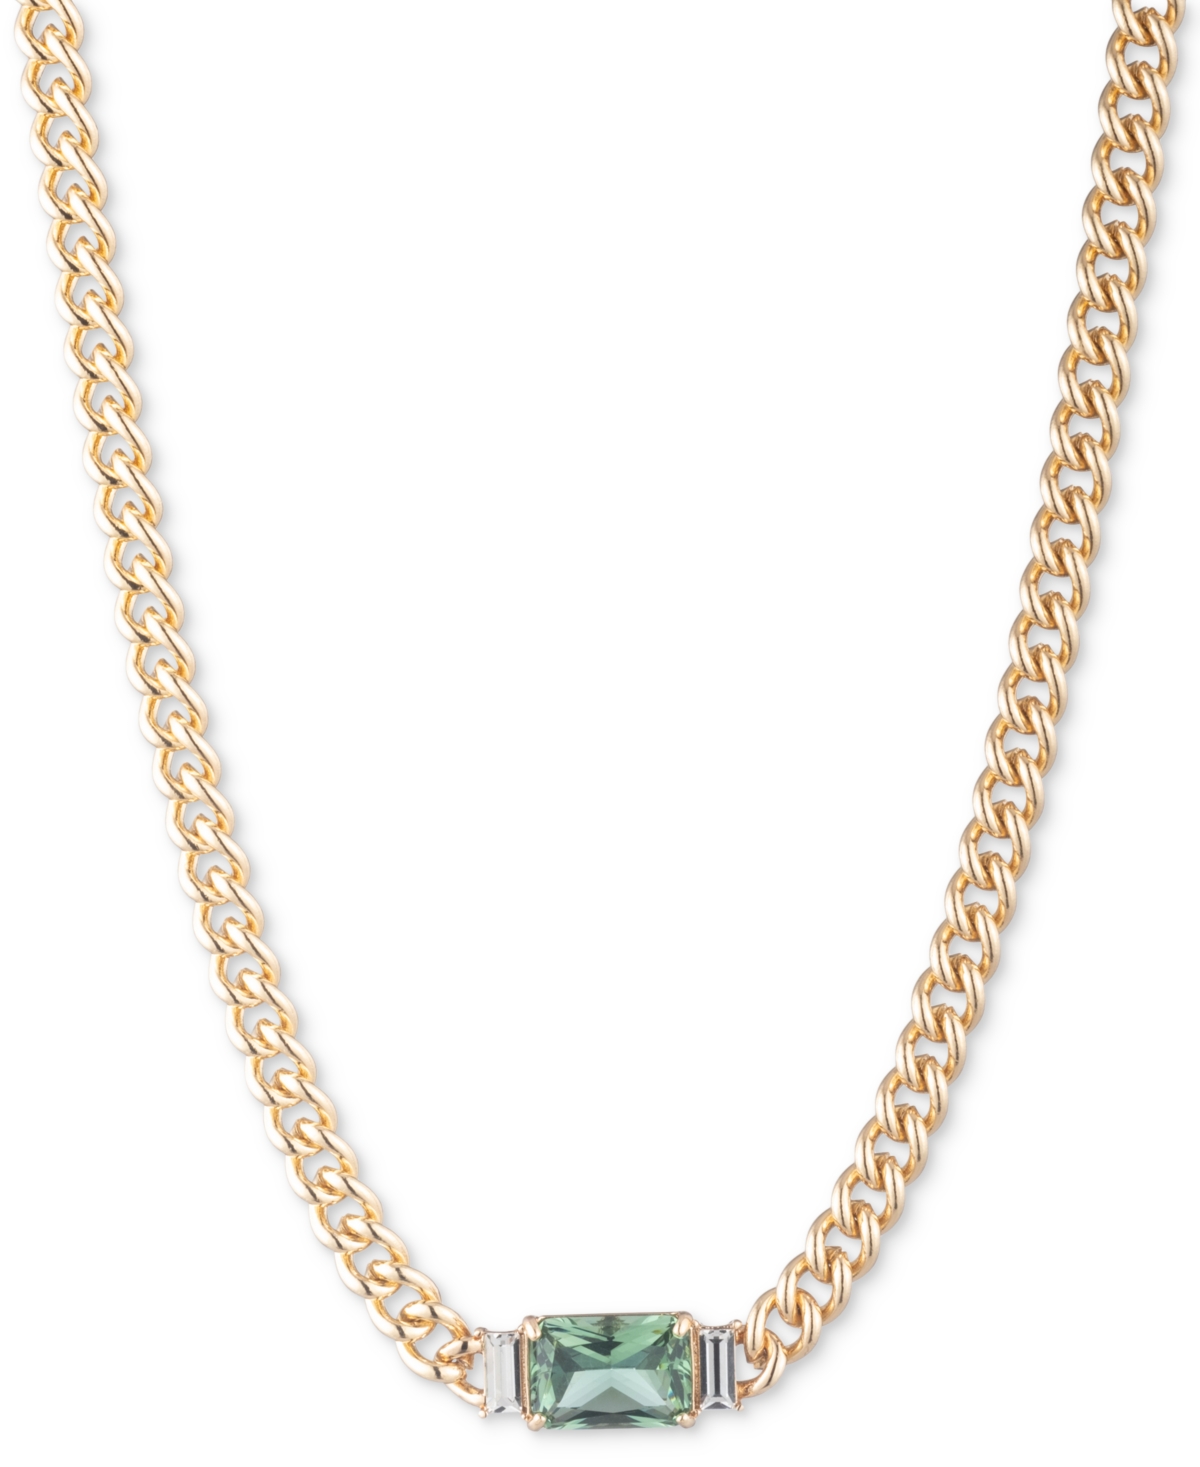 Gold-Tone Stone 16" Statement Necklace - Light Gree